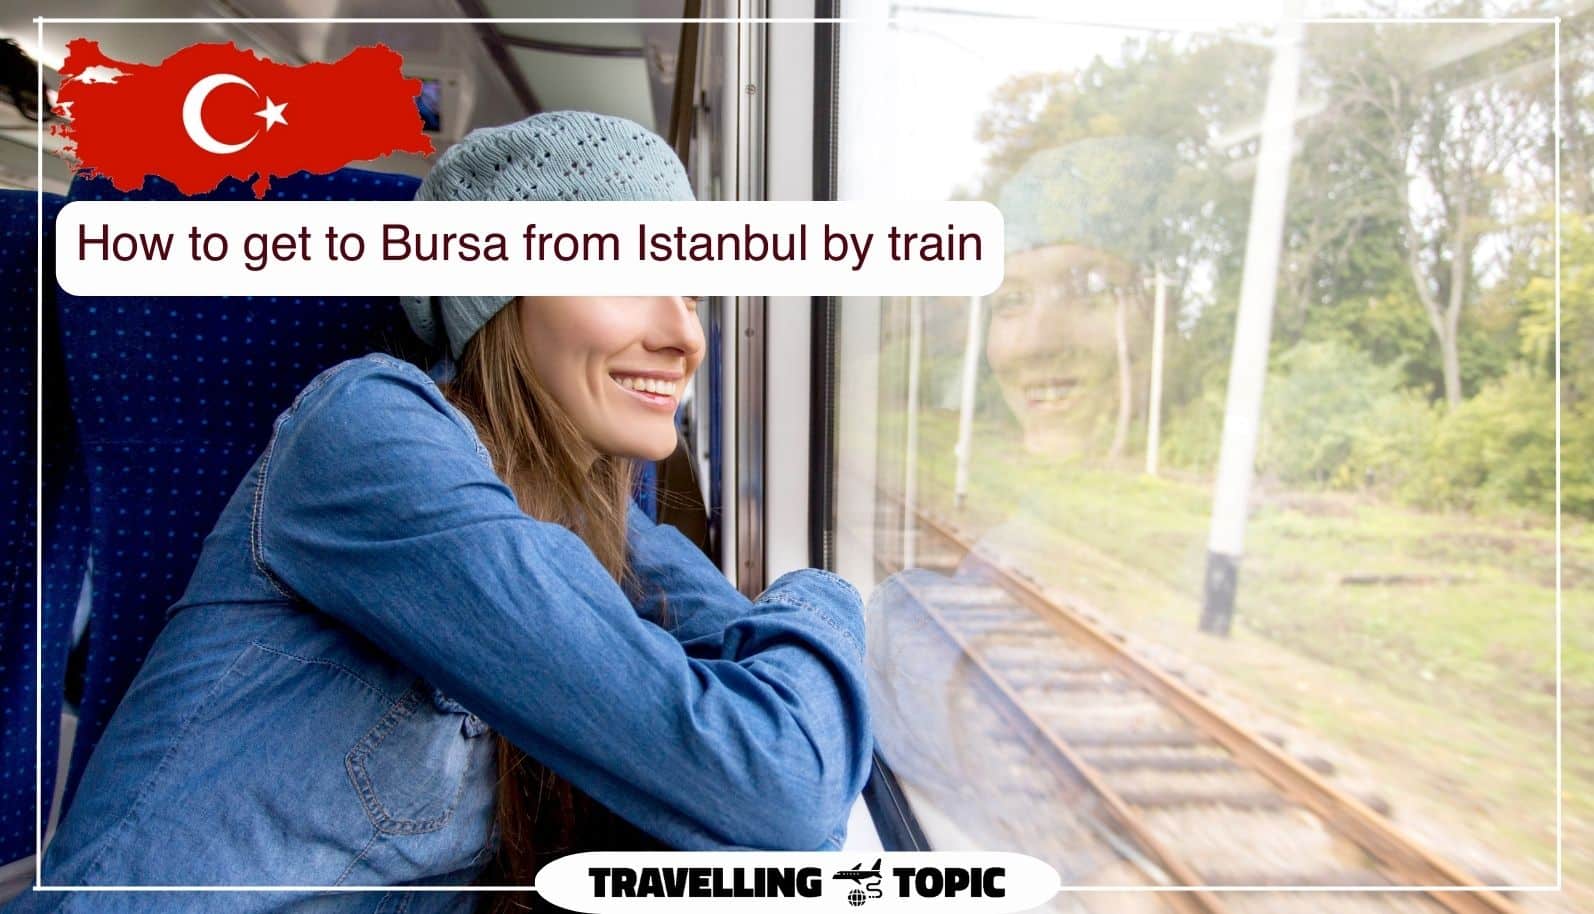 How to get to Bursa from Istanbul by train